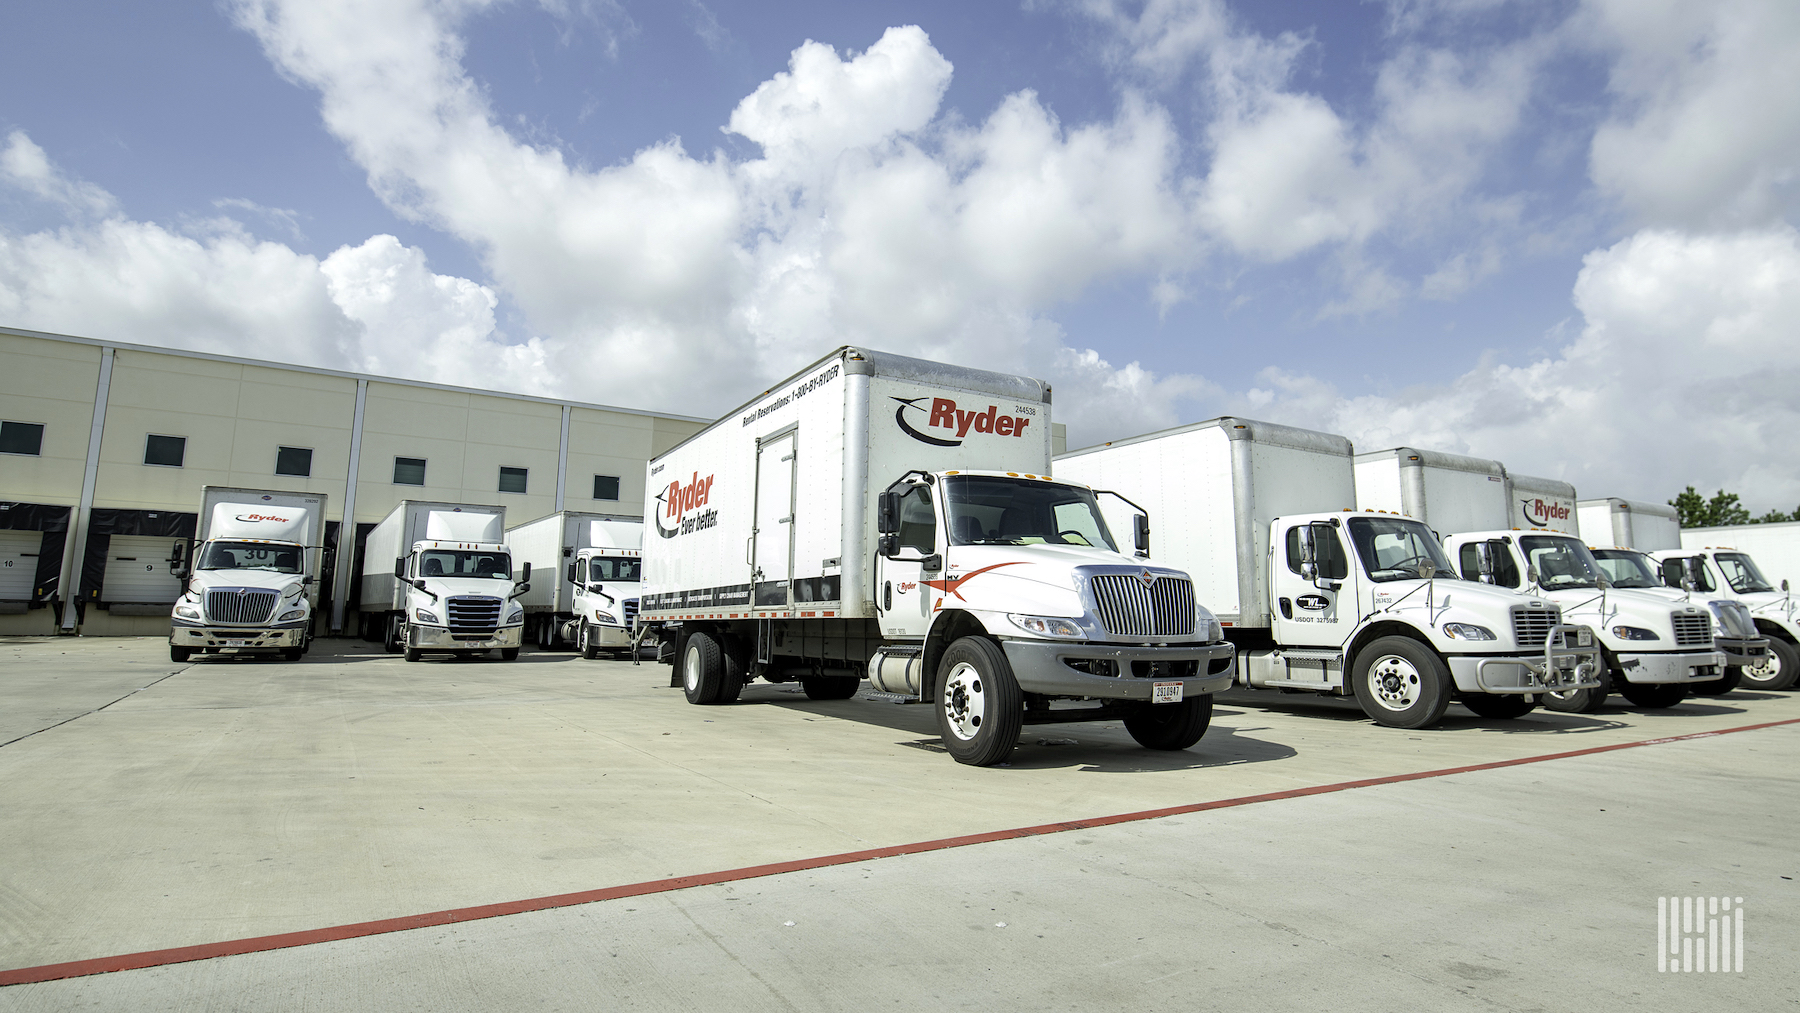 Nine trucks with the logo of Ryder written on them are parked at a facility